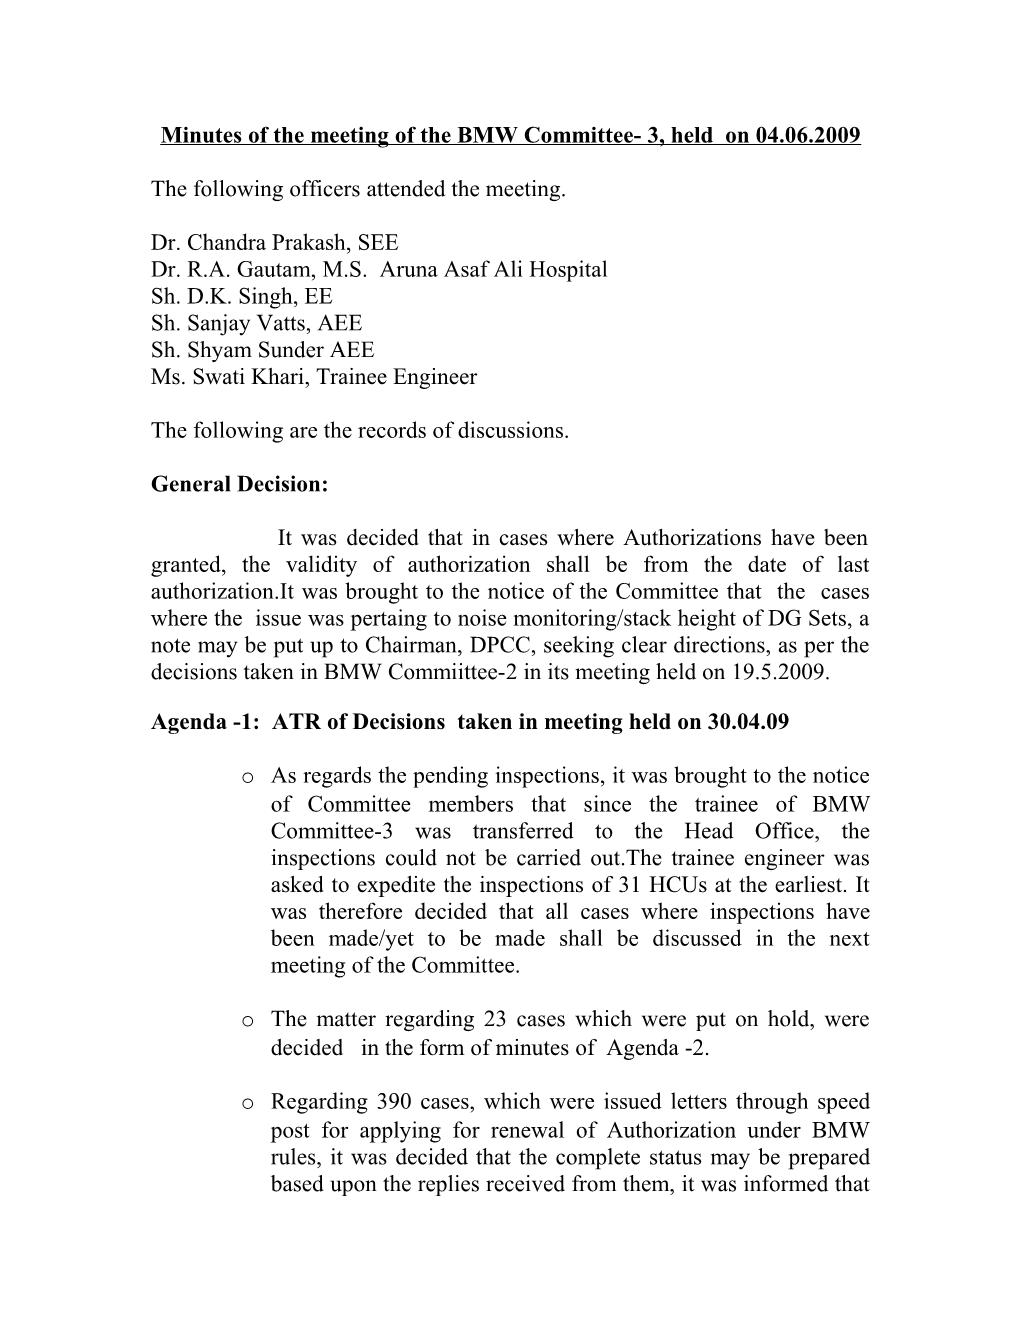 Minutes of the Meeting of the BMW Committee- 3, Held on 04.06.2009